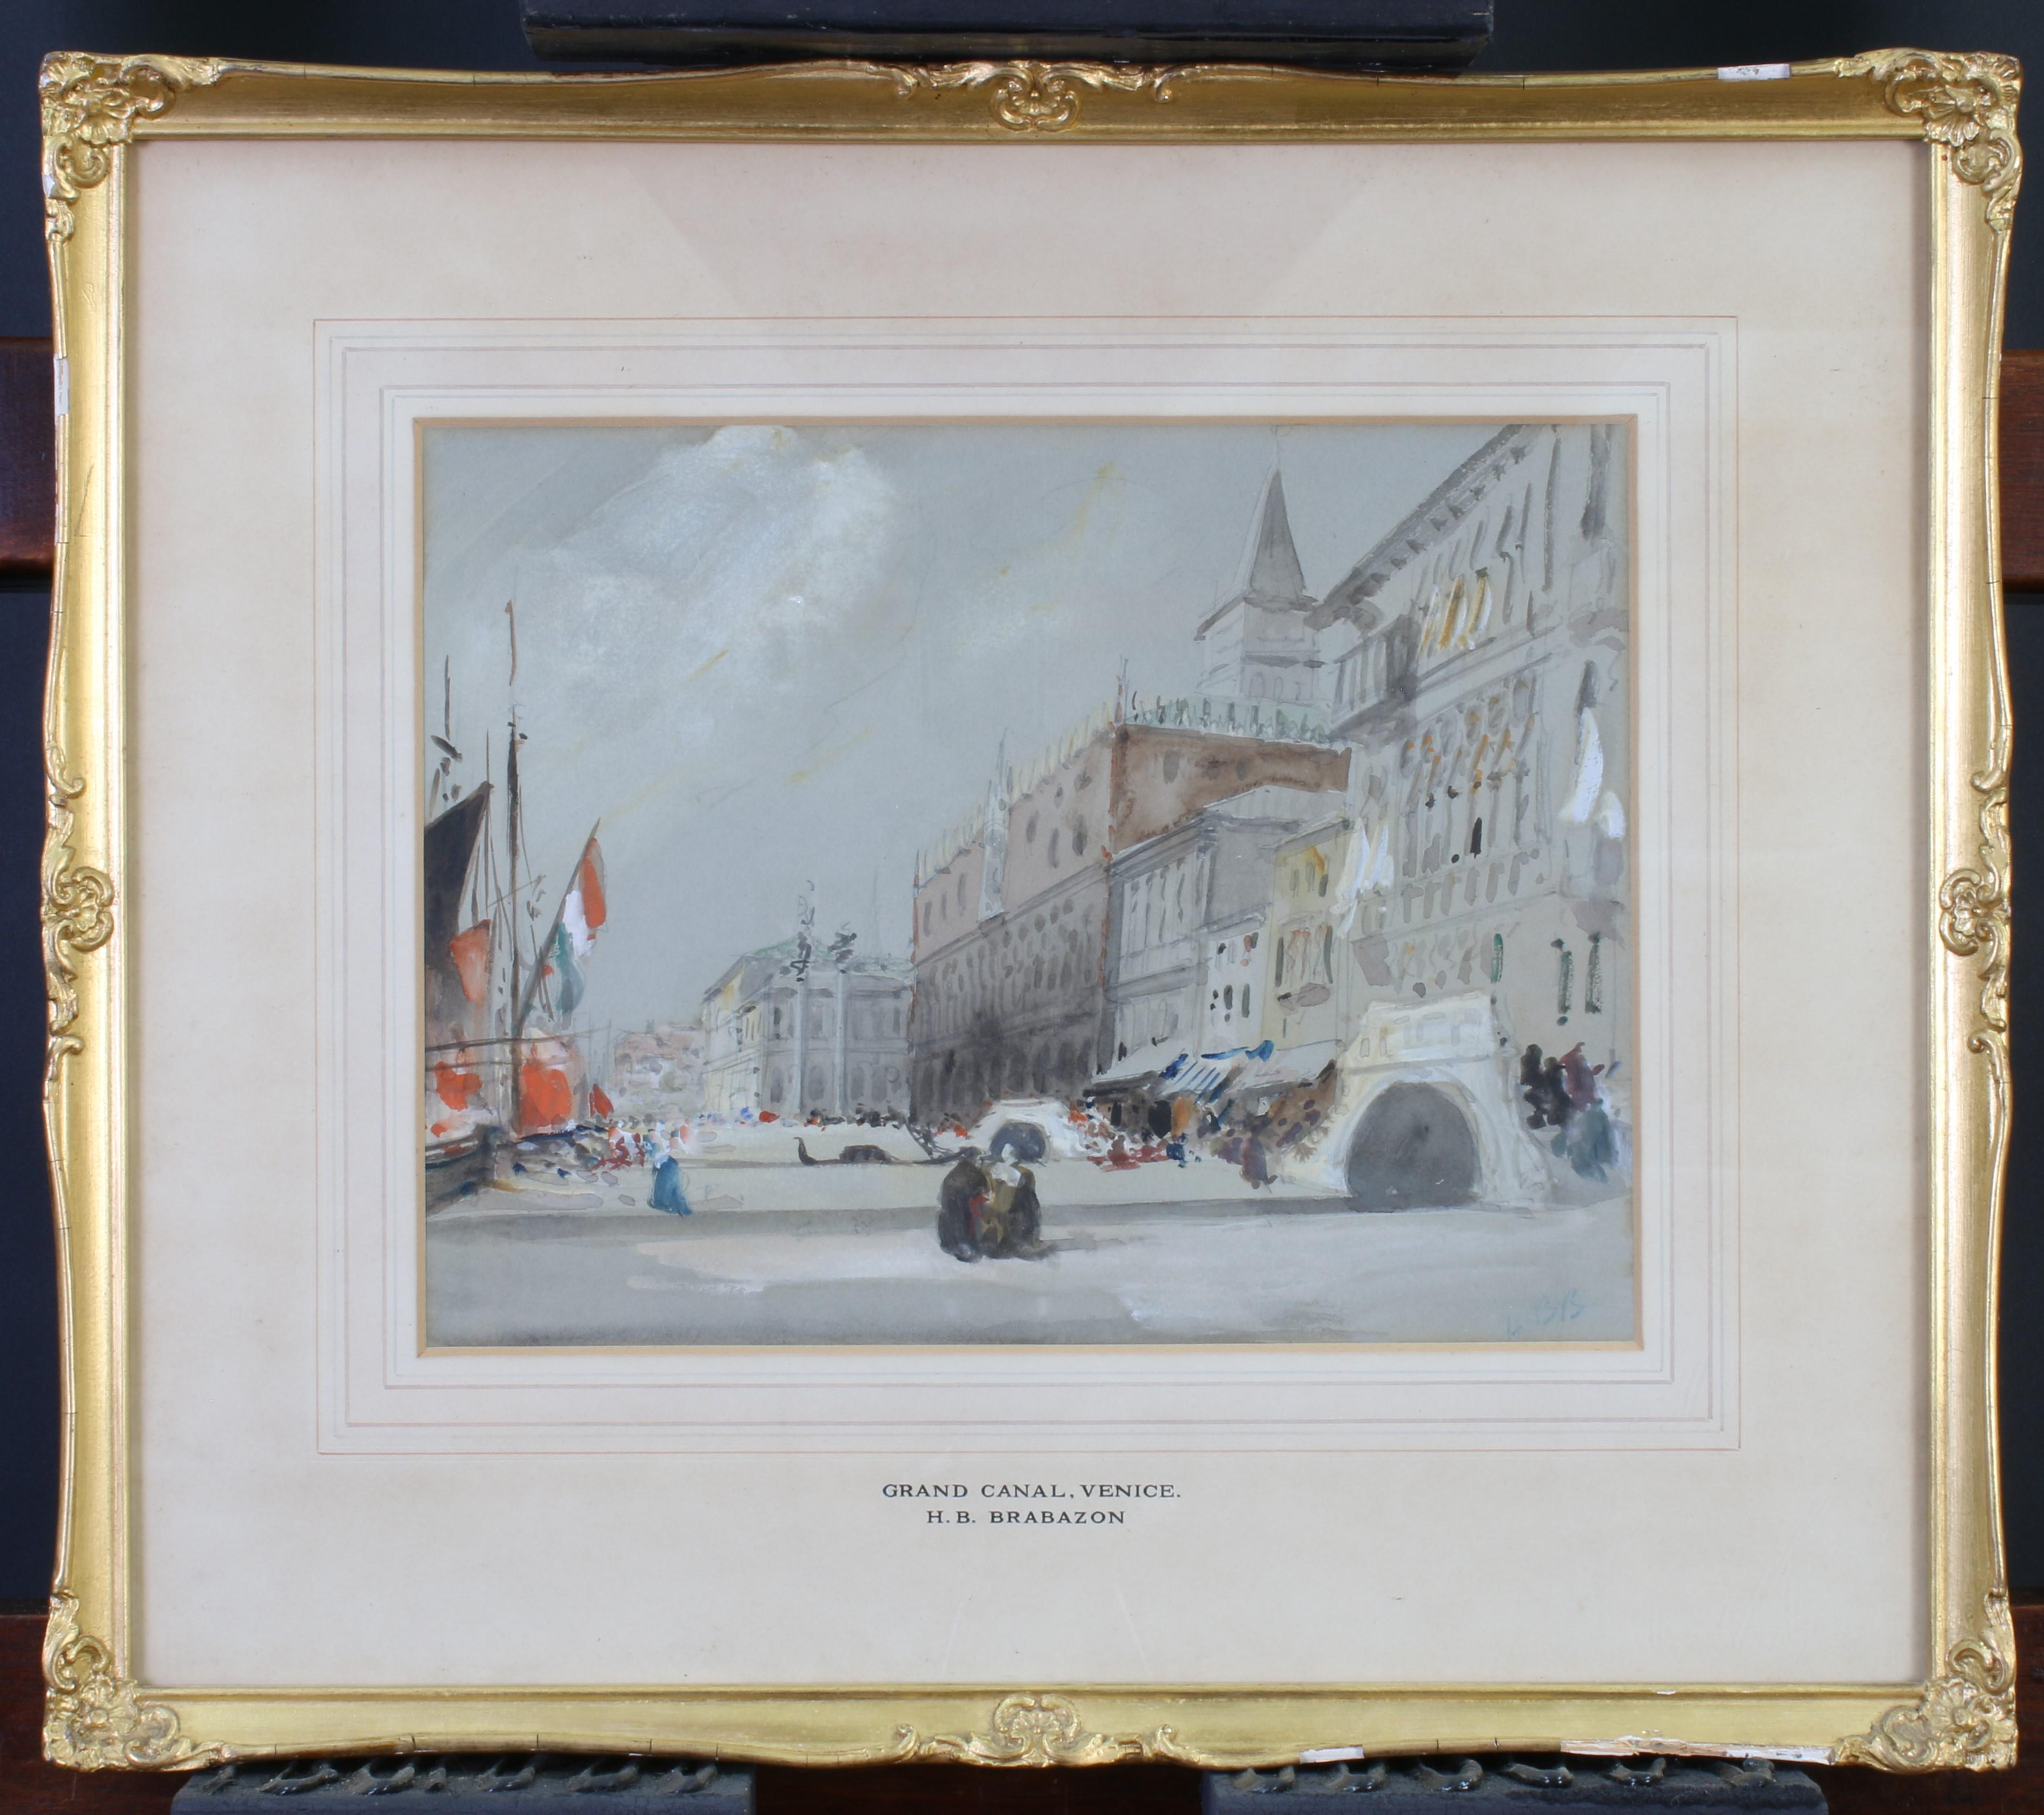  The Doges Palace Promenade Venice - Painting by Hercules Brabazon Brabazon